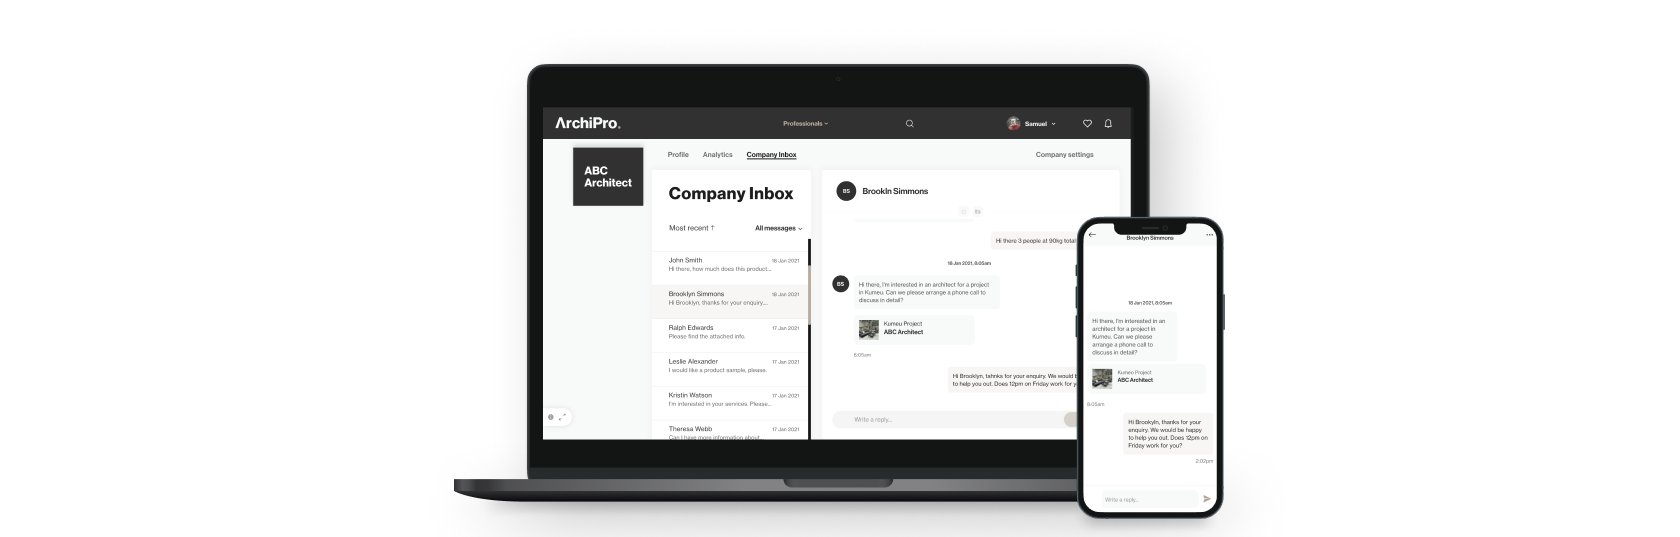 New Feature - Company Inbox